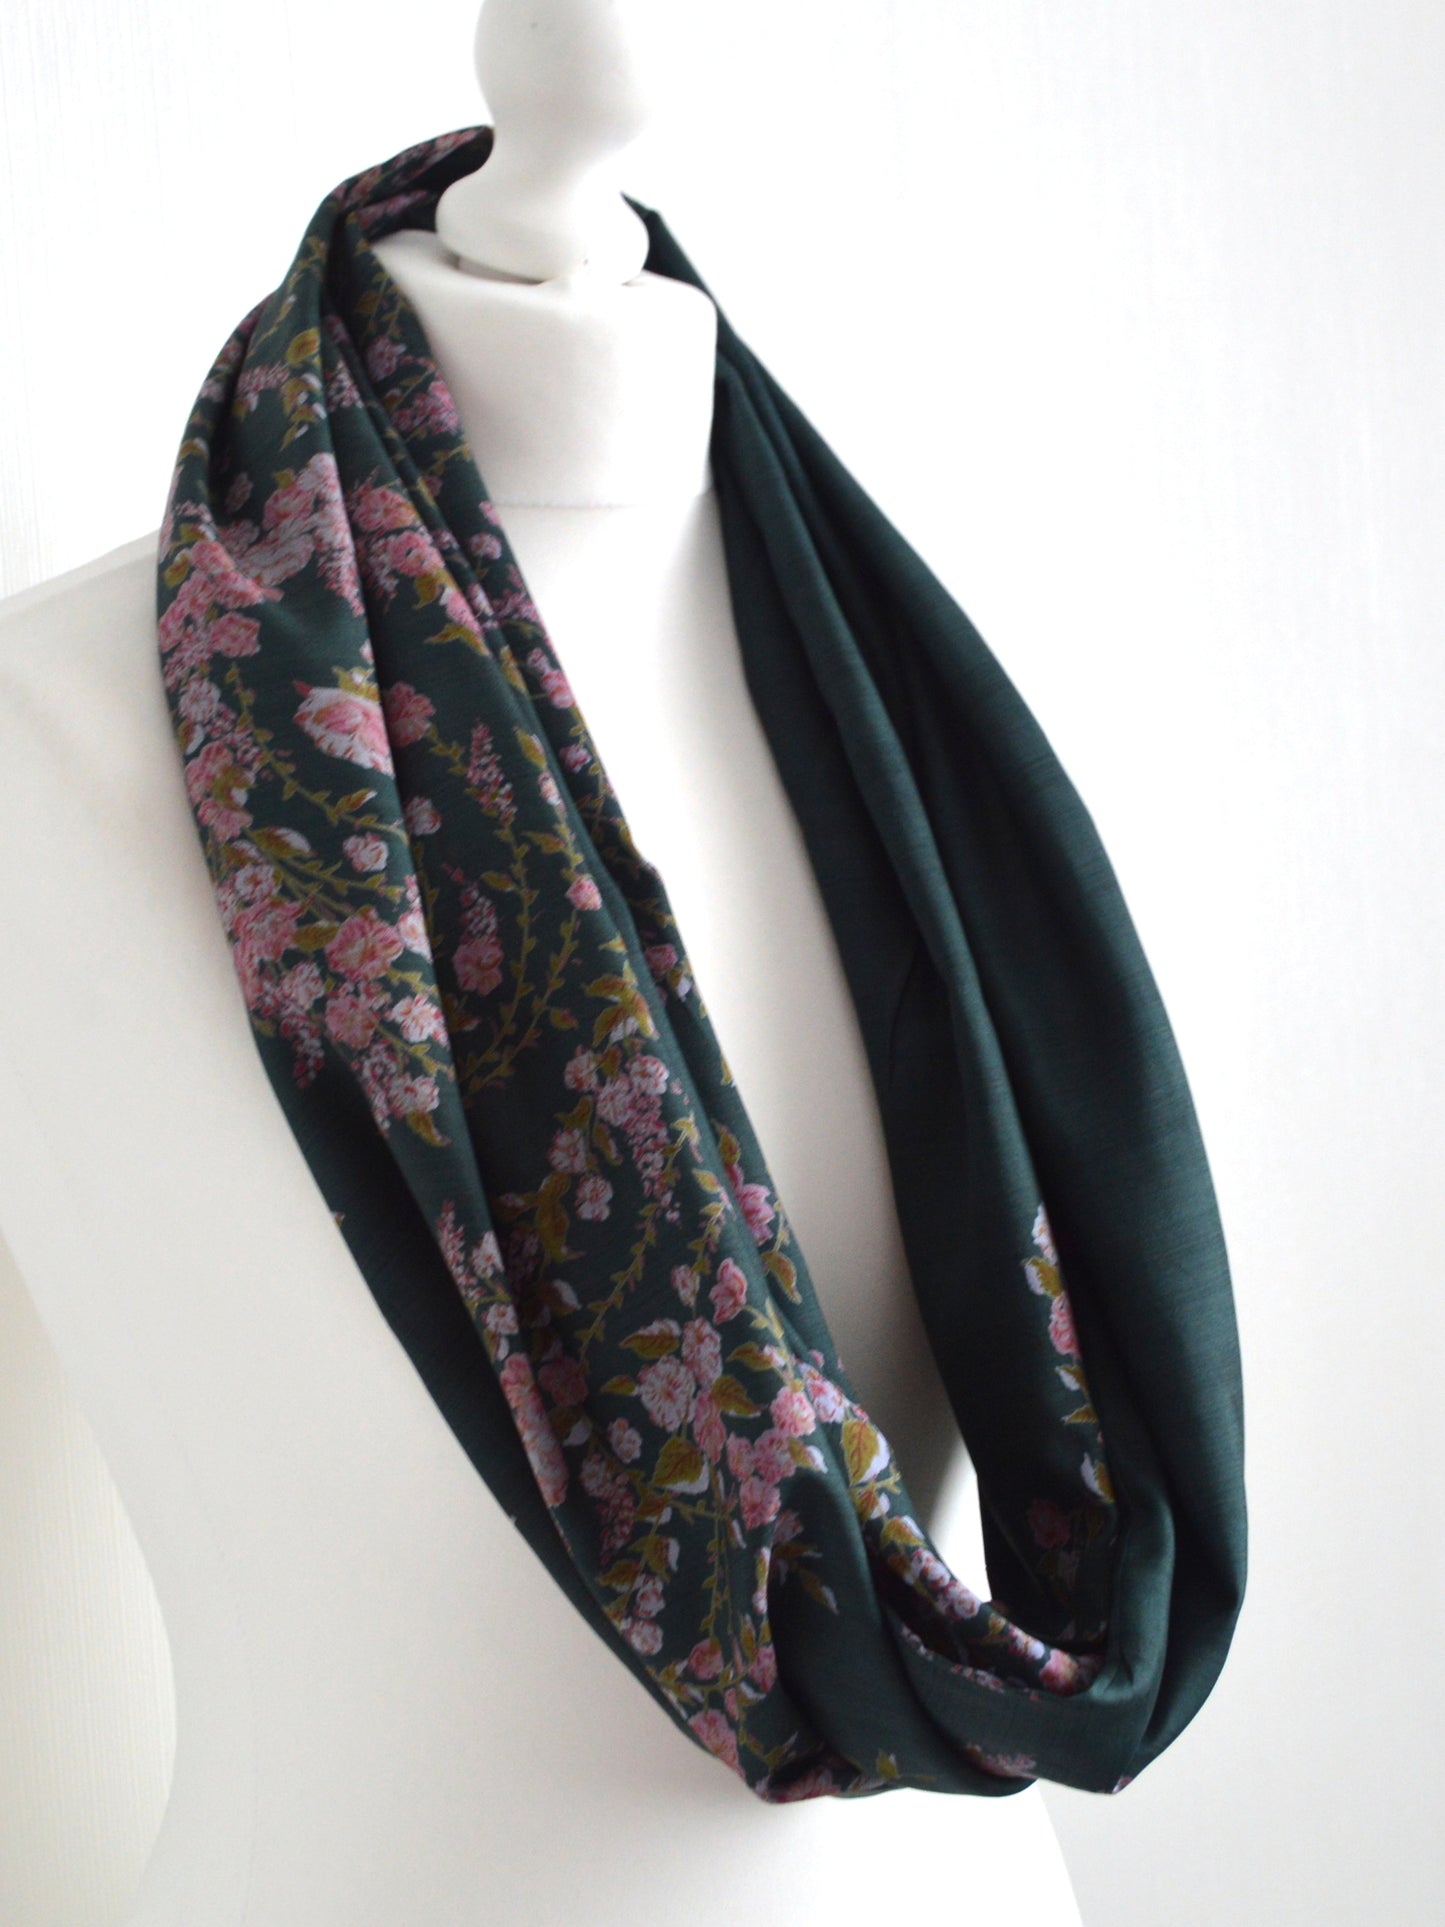 Green Floral Sari Silk Scarf - Boho Handmade Womens Scarf - Eco Friendly Autumn Fall Winter Trend Unique Upcycled Christmas Gift For Her